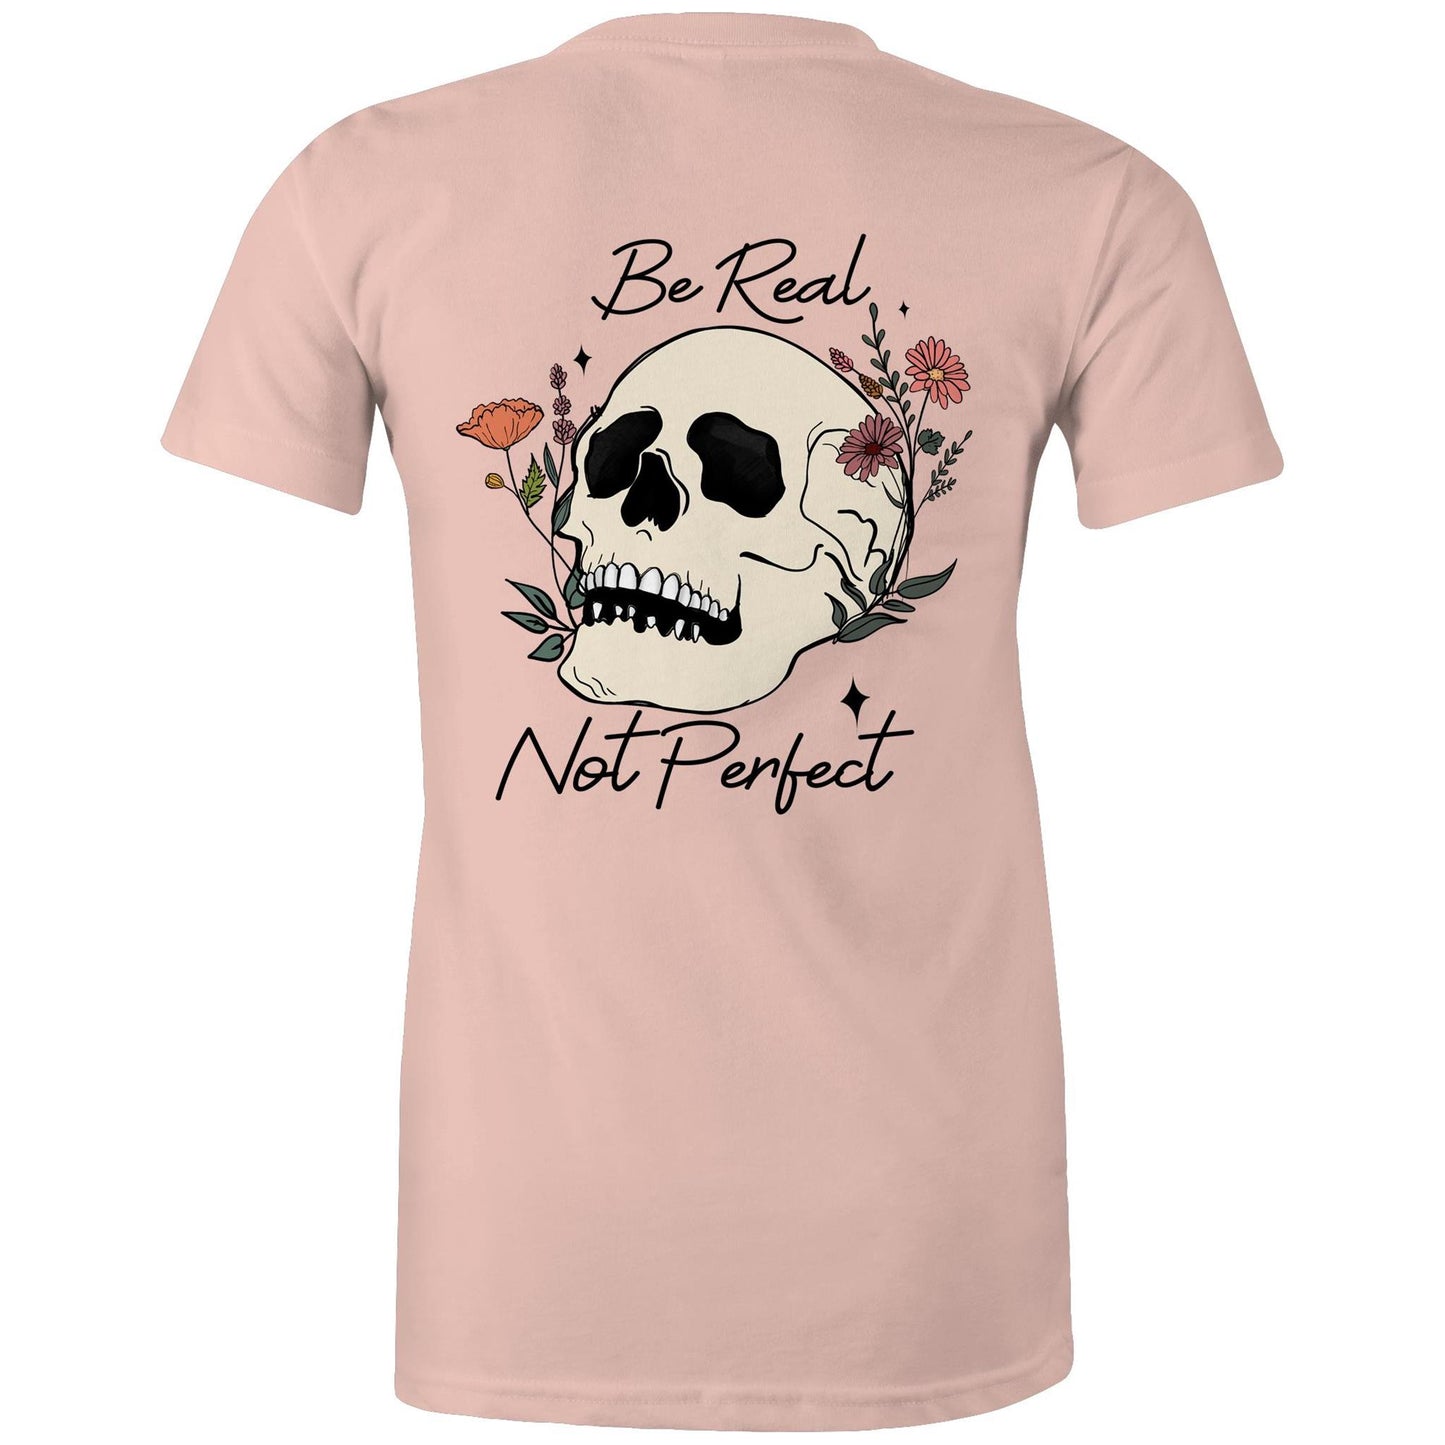 Womens Tee - Be Real Not Perfect